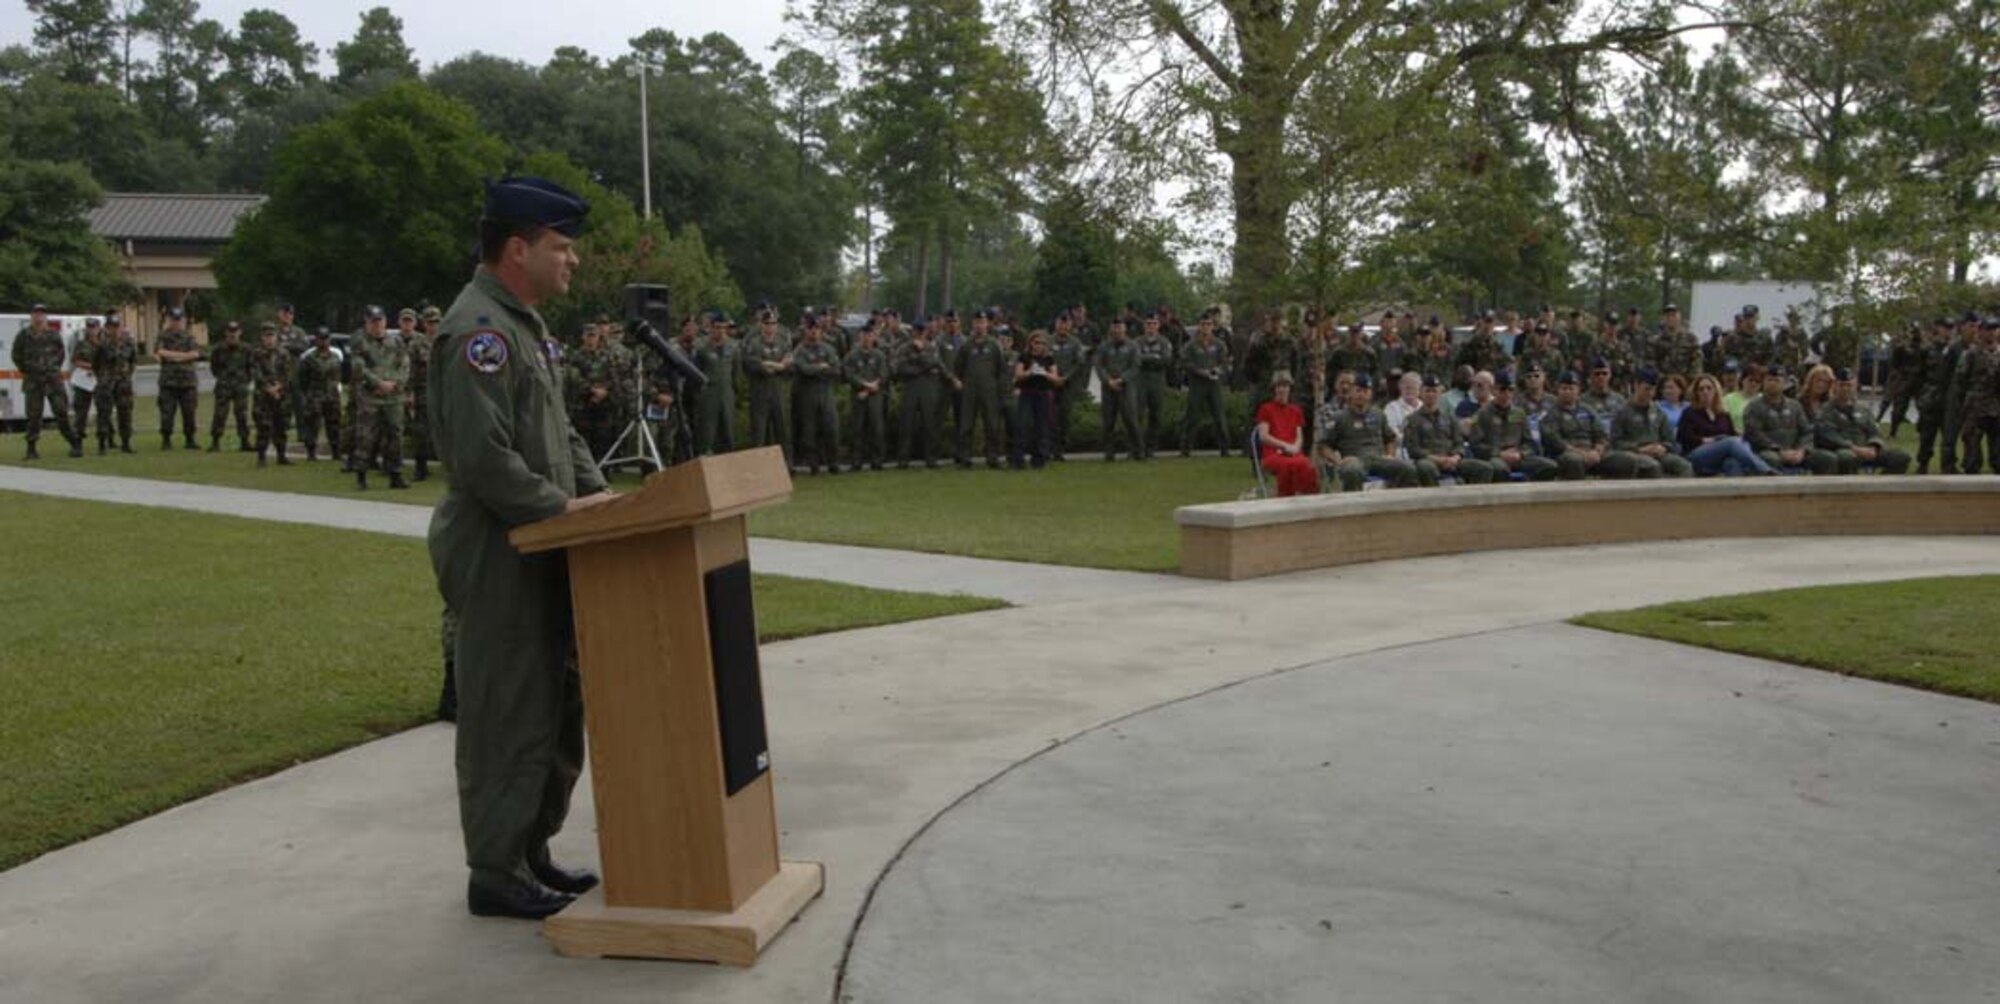 MOODY AIR FORCE BASE, Ga. -- Lt. Col. Robert Sweet, 435th Fighter Training Squadron commander, speaks at the POW/MIA ceremony here Sept. 15, about the his time as a prisoner of war during Operation Desert Storm. The ceremony was intended to show respect to America’s warriors who are prisoners of war or missing in action during National POW/MIA Remembrance Day. (USAF photo by Airman 1st Class Elizabeth Rissmiller)